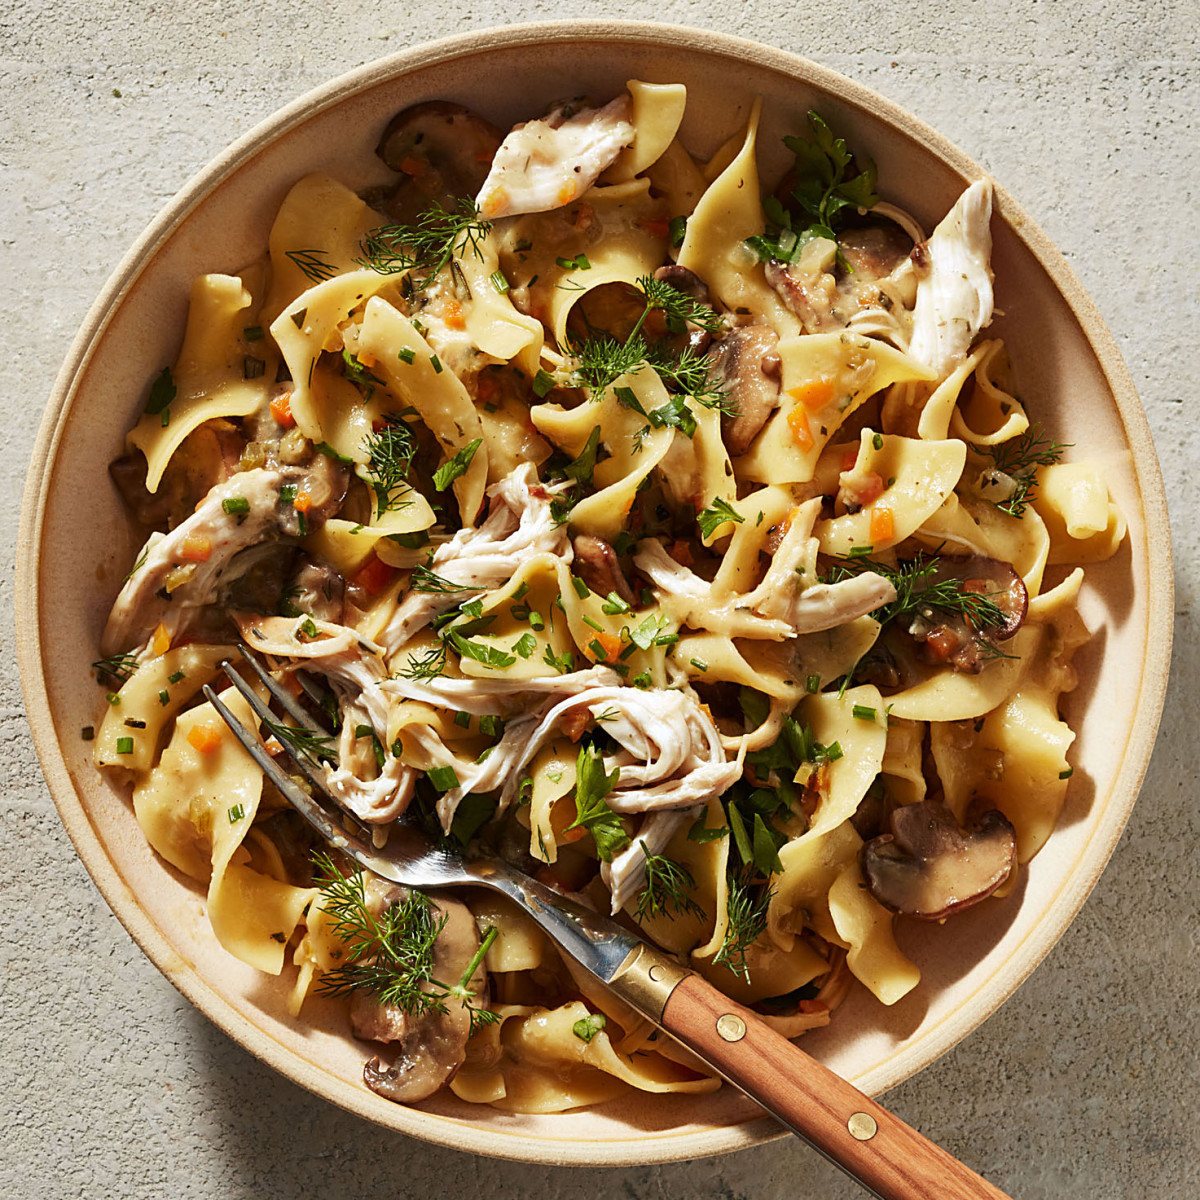 Recipes With Egg Noodles And Chicken
 Creamy Chicken & Mushroom Egg Noodles Recipe Rachael Ray